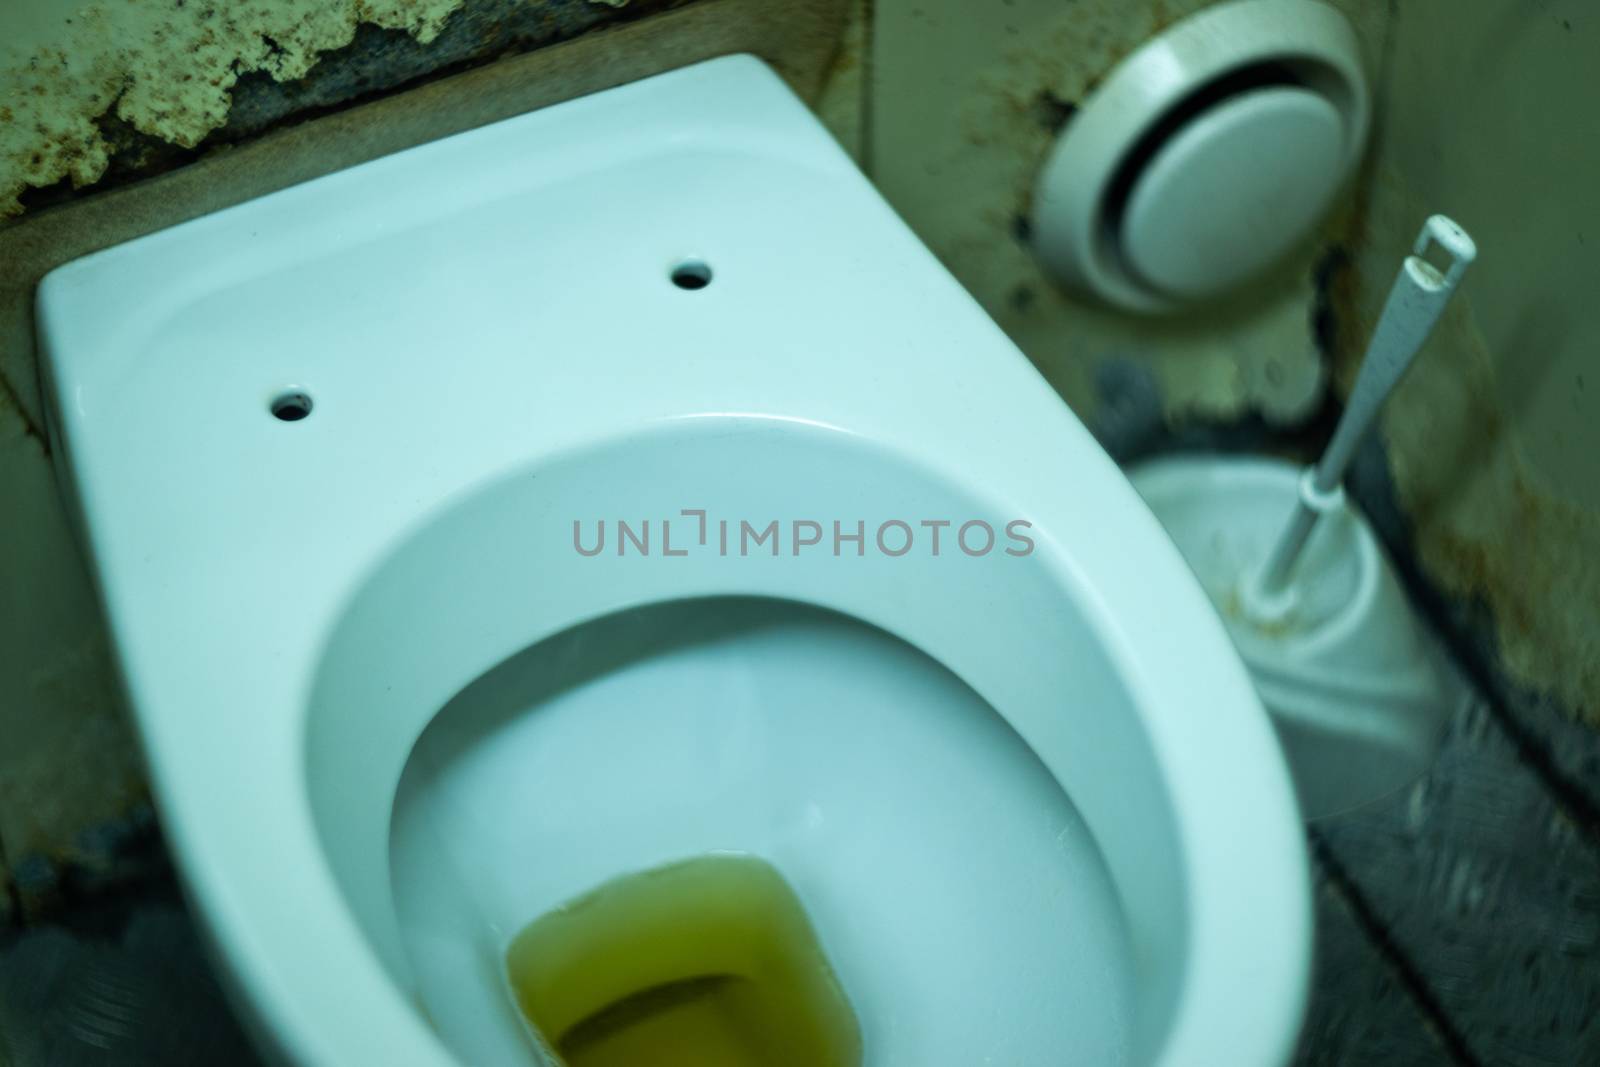 Dirty terrible toilet in a public toilet. Plating deteriorated from moisture and urine. Hue yellow urine in toilet, dirty floor. by alexsdriver